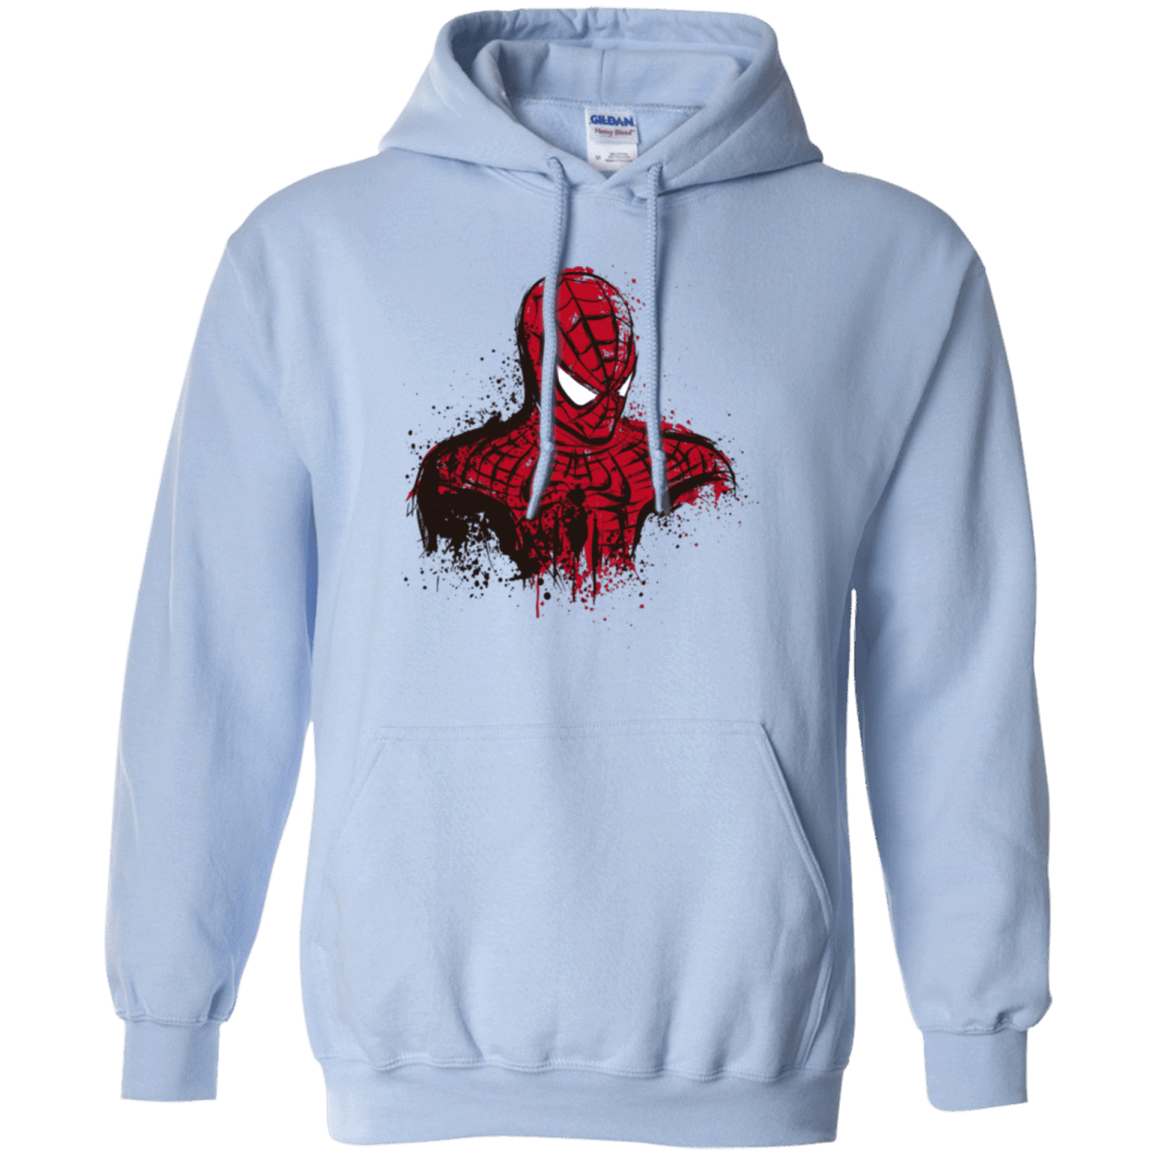 Sweatshirts Light Blue / Small Behind The Mask Pullover Hoodie